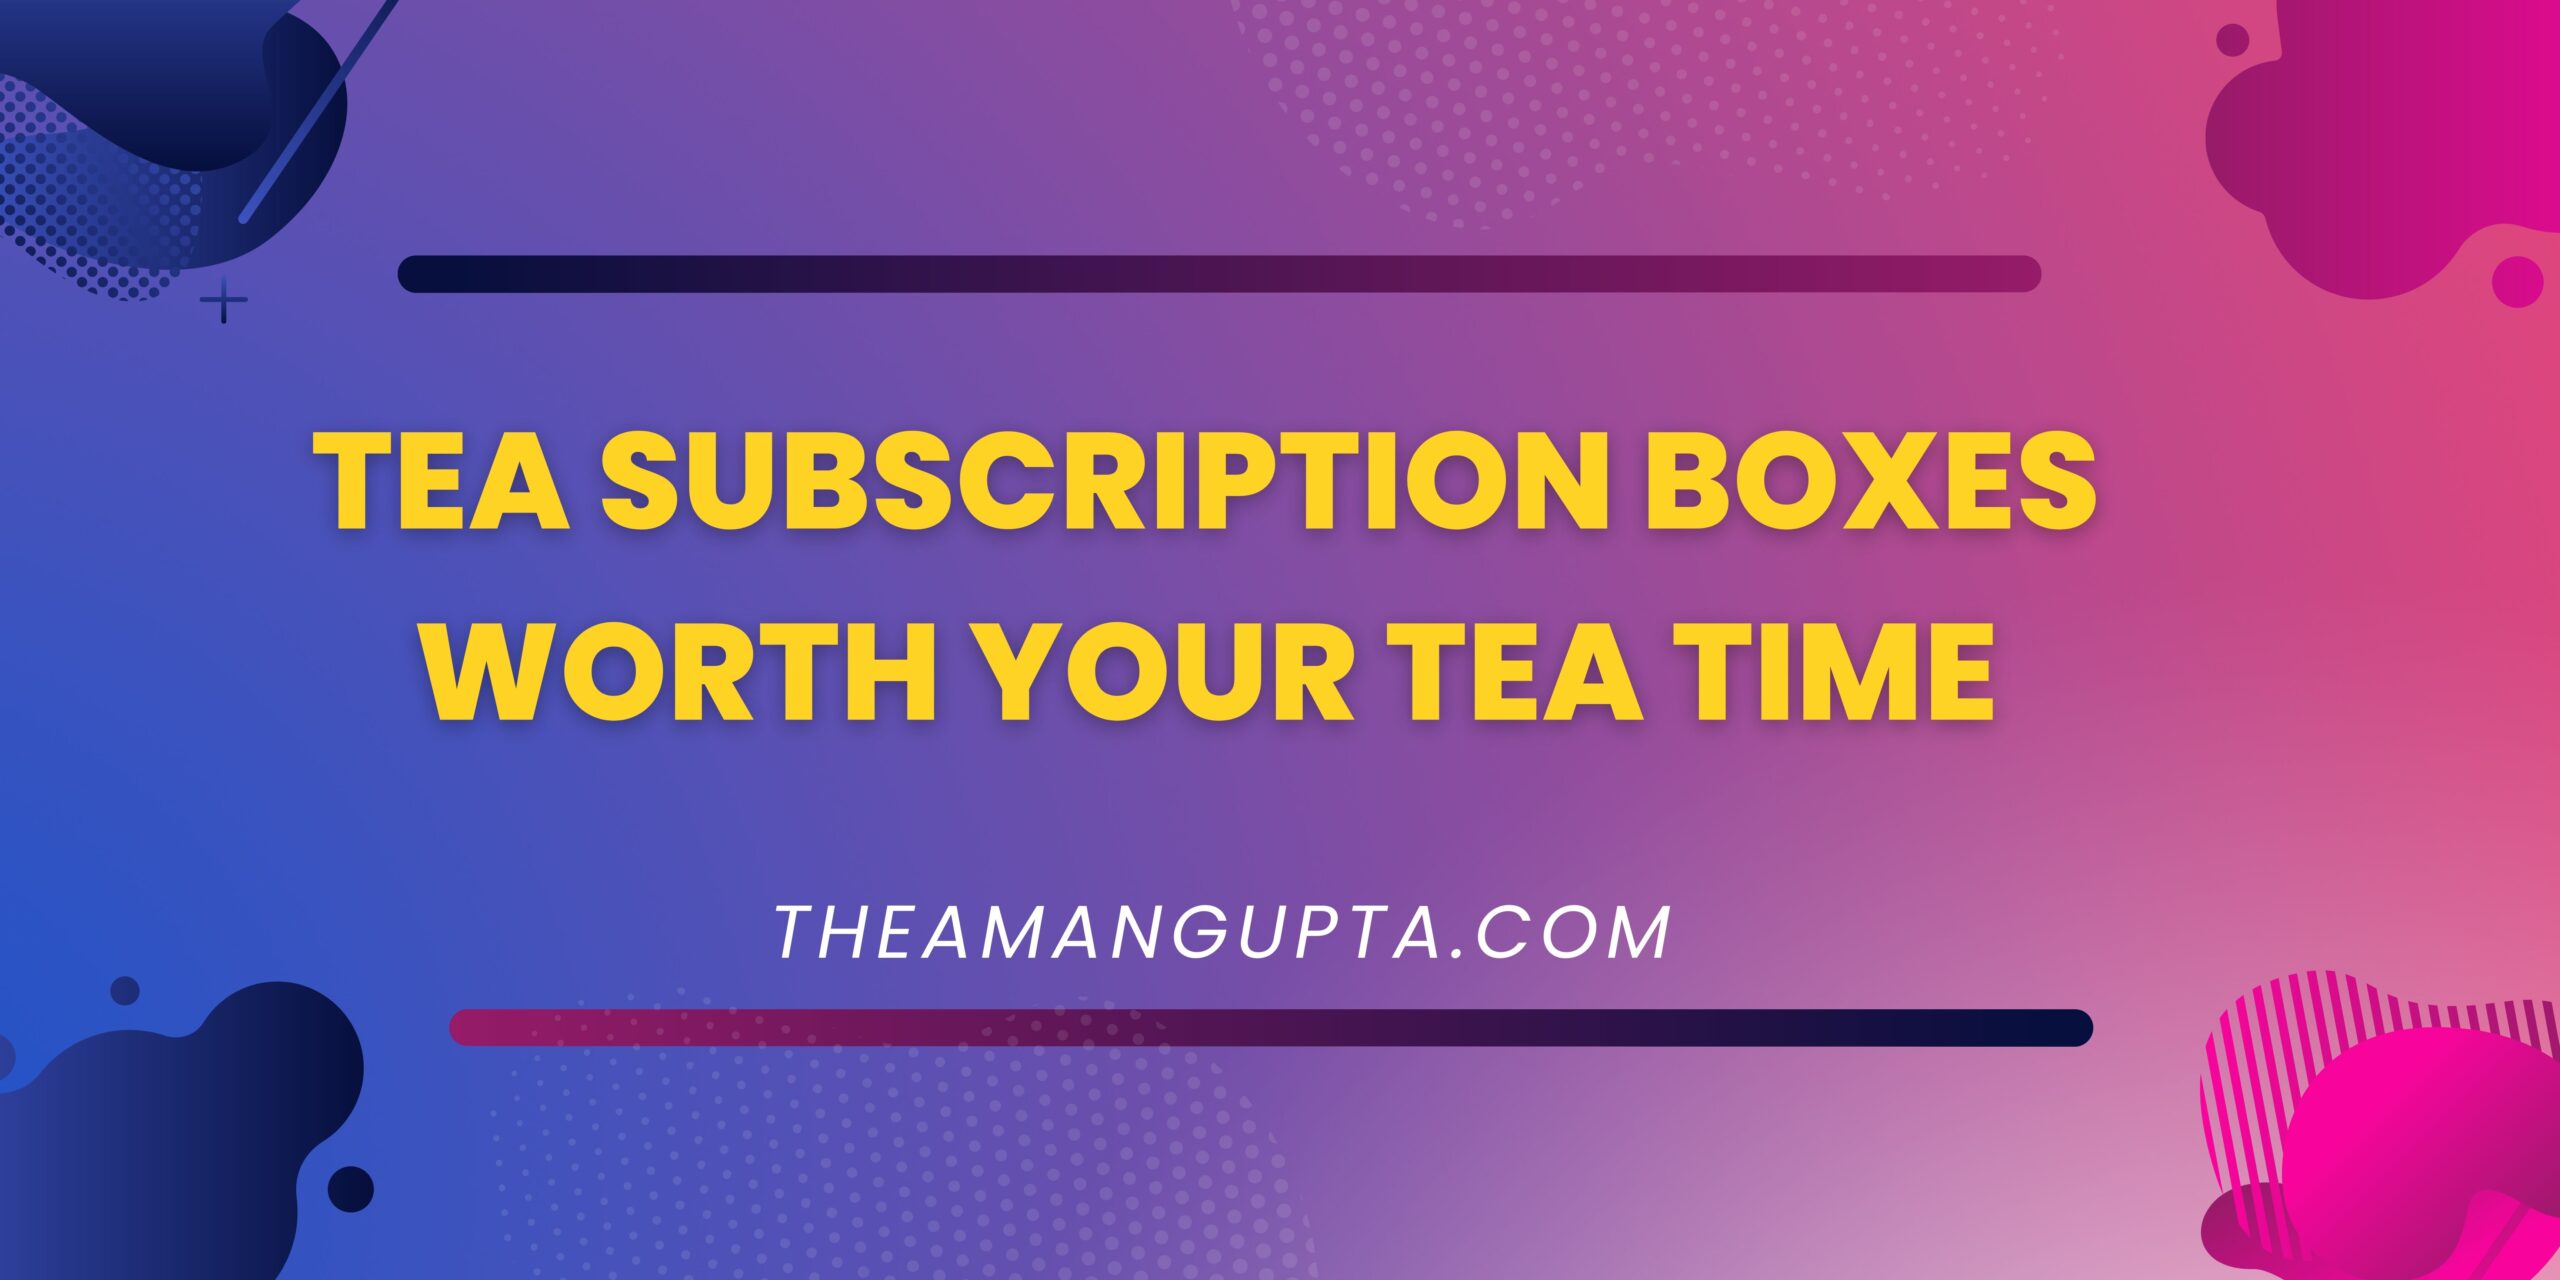 Tea Subscription Boxes Worth Your Tea Time